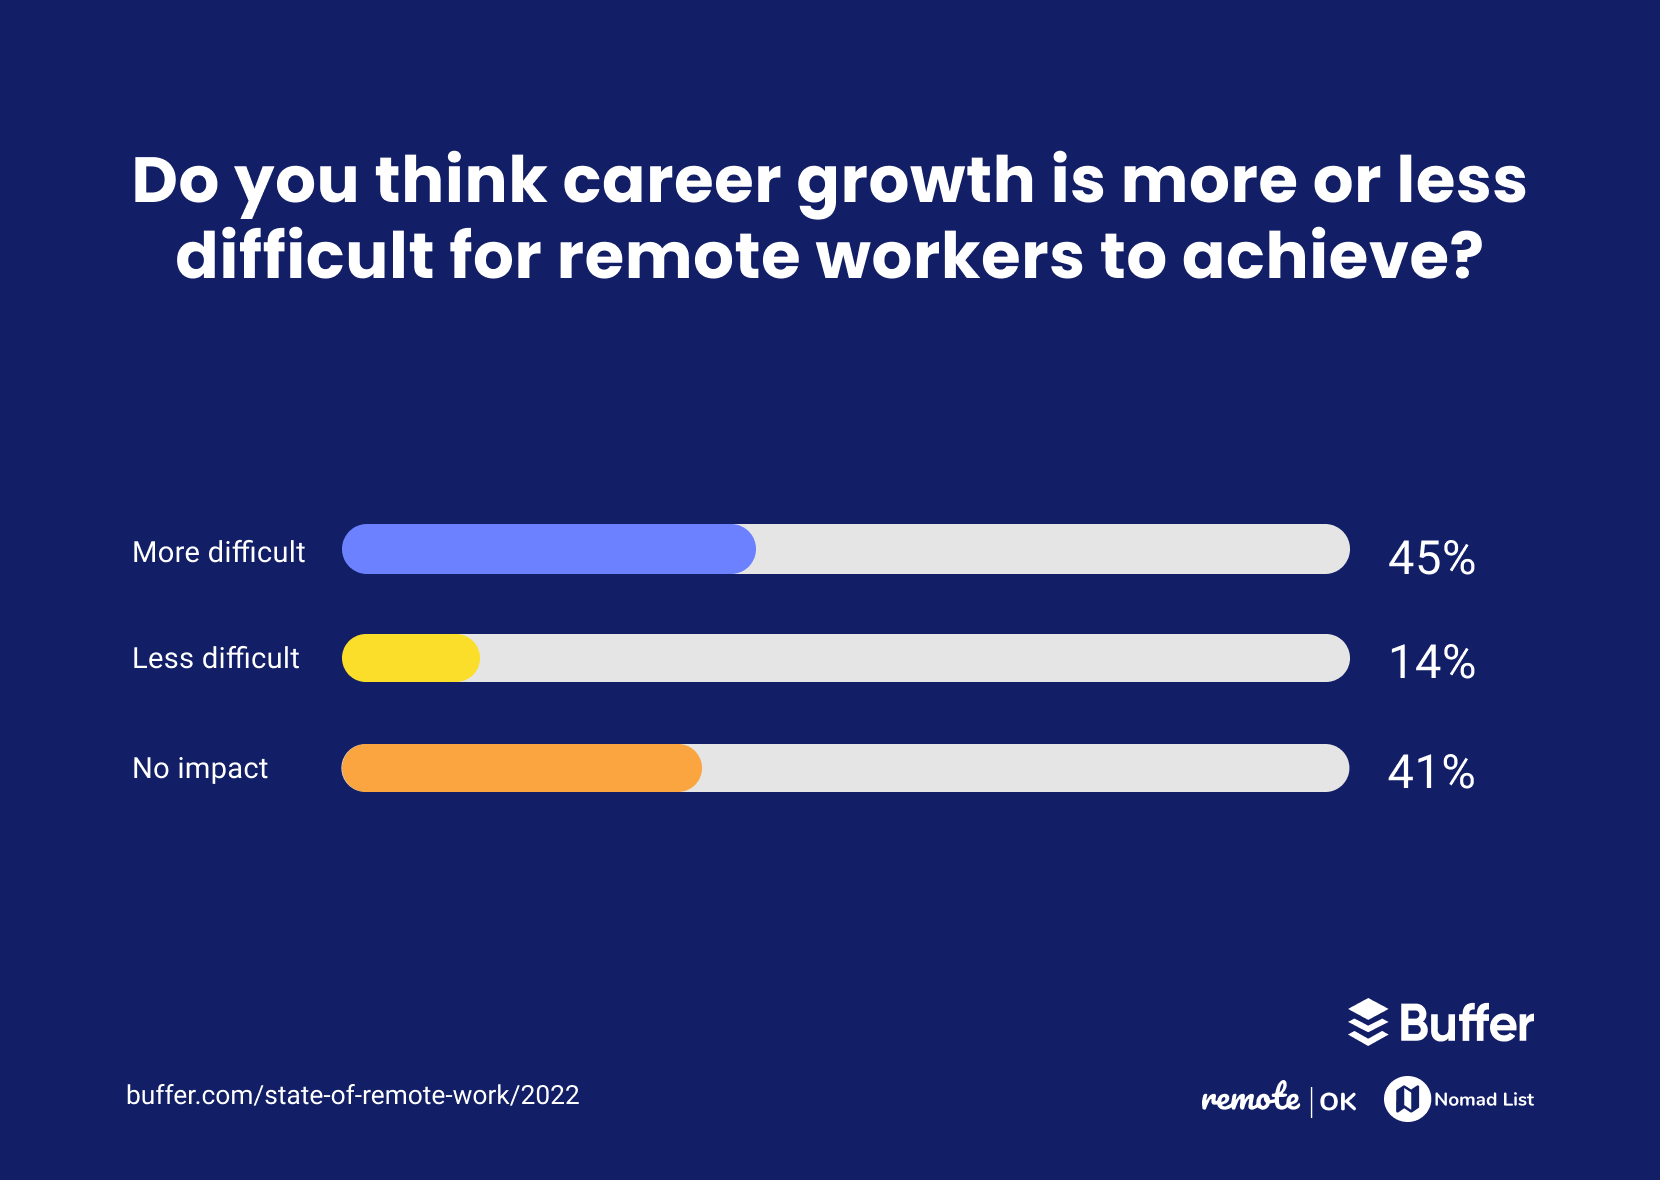 45% of people thought it would be more difficult to achieve growth in their careers working remotely